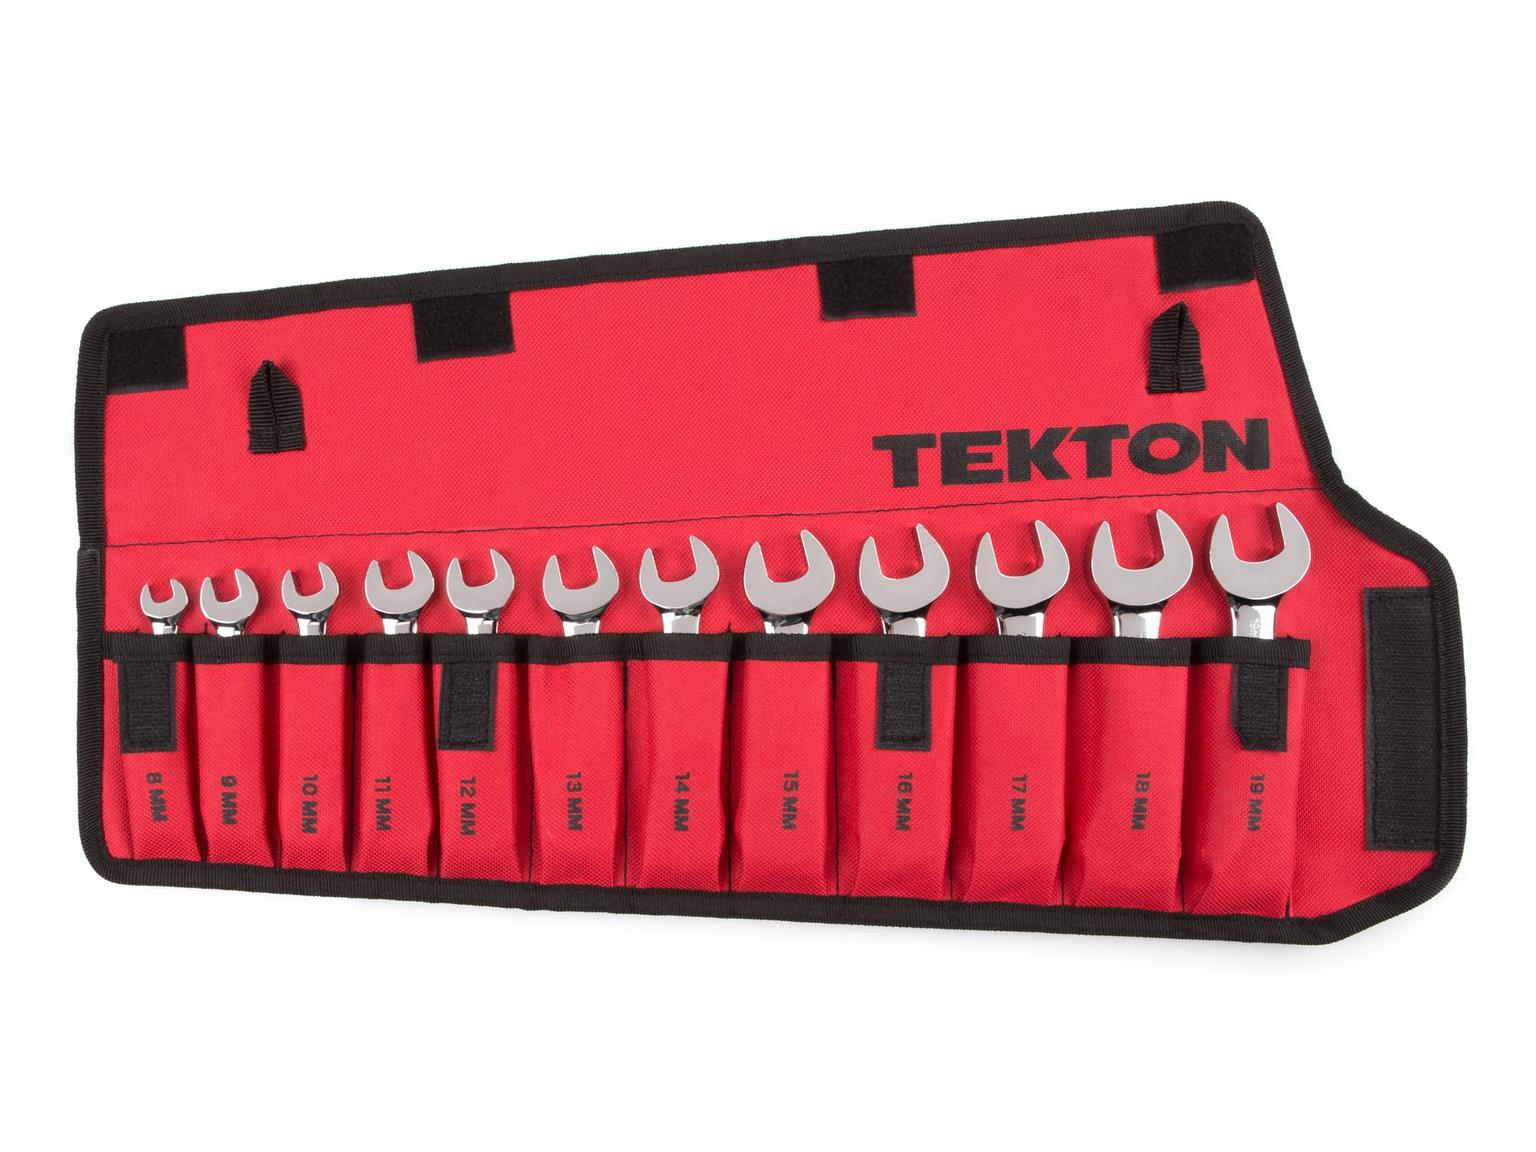 TEKTON WRN01190-T Stubby Combination Wrench Set with Pouch, 12-Piece (8 - 19 mm)